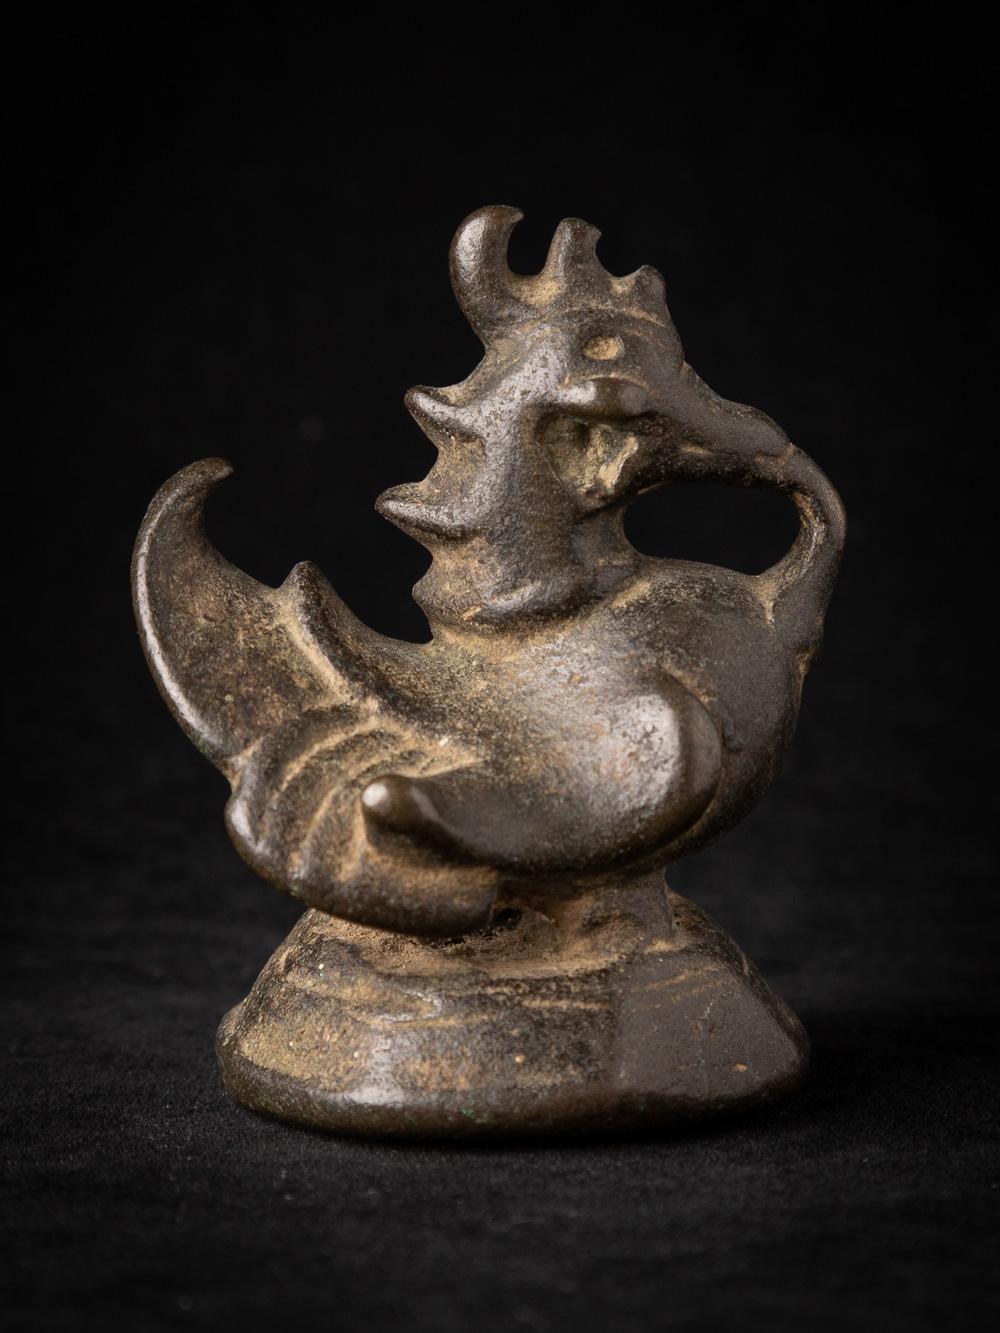 Material : bronze
6,5 cm high
4,6 cm wide and 5 cm deep
18th century
Weight: 305 grams
Originating from Burma
Nr: G-57